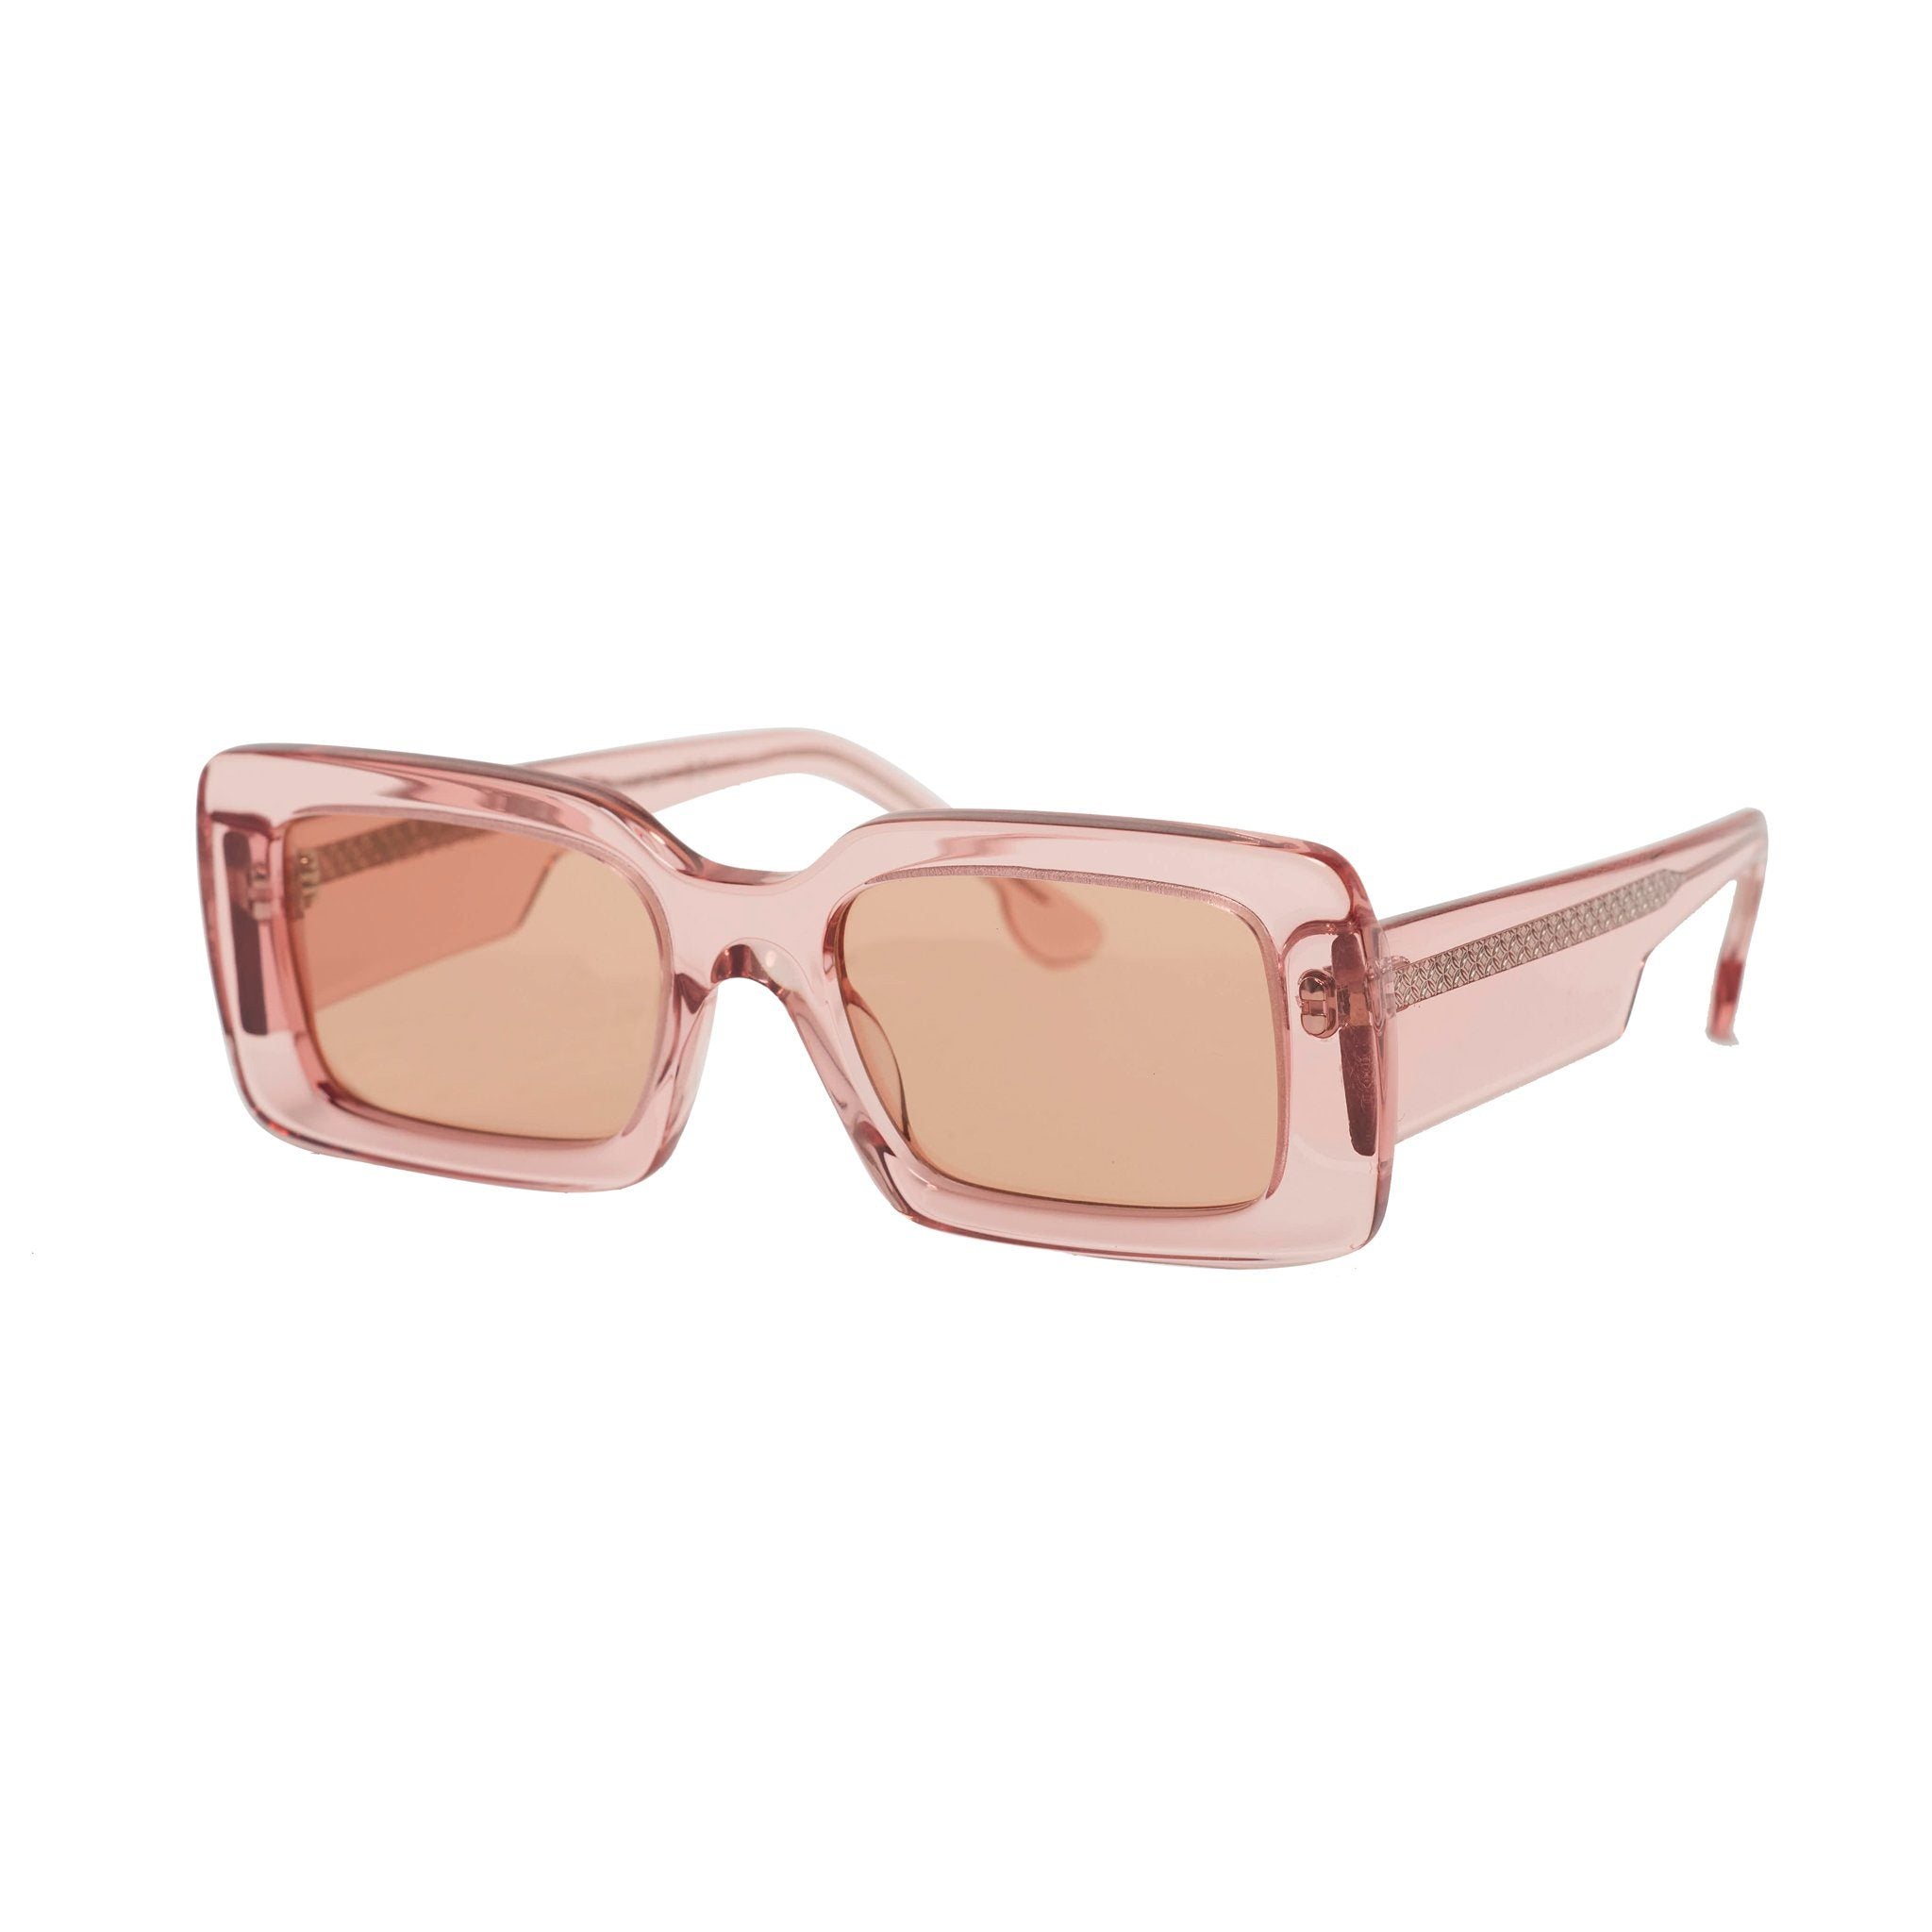 Transparent pink frames sunglasses with pink lenses. Front view